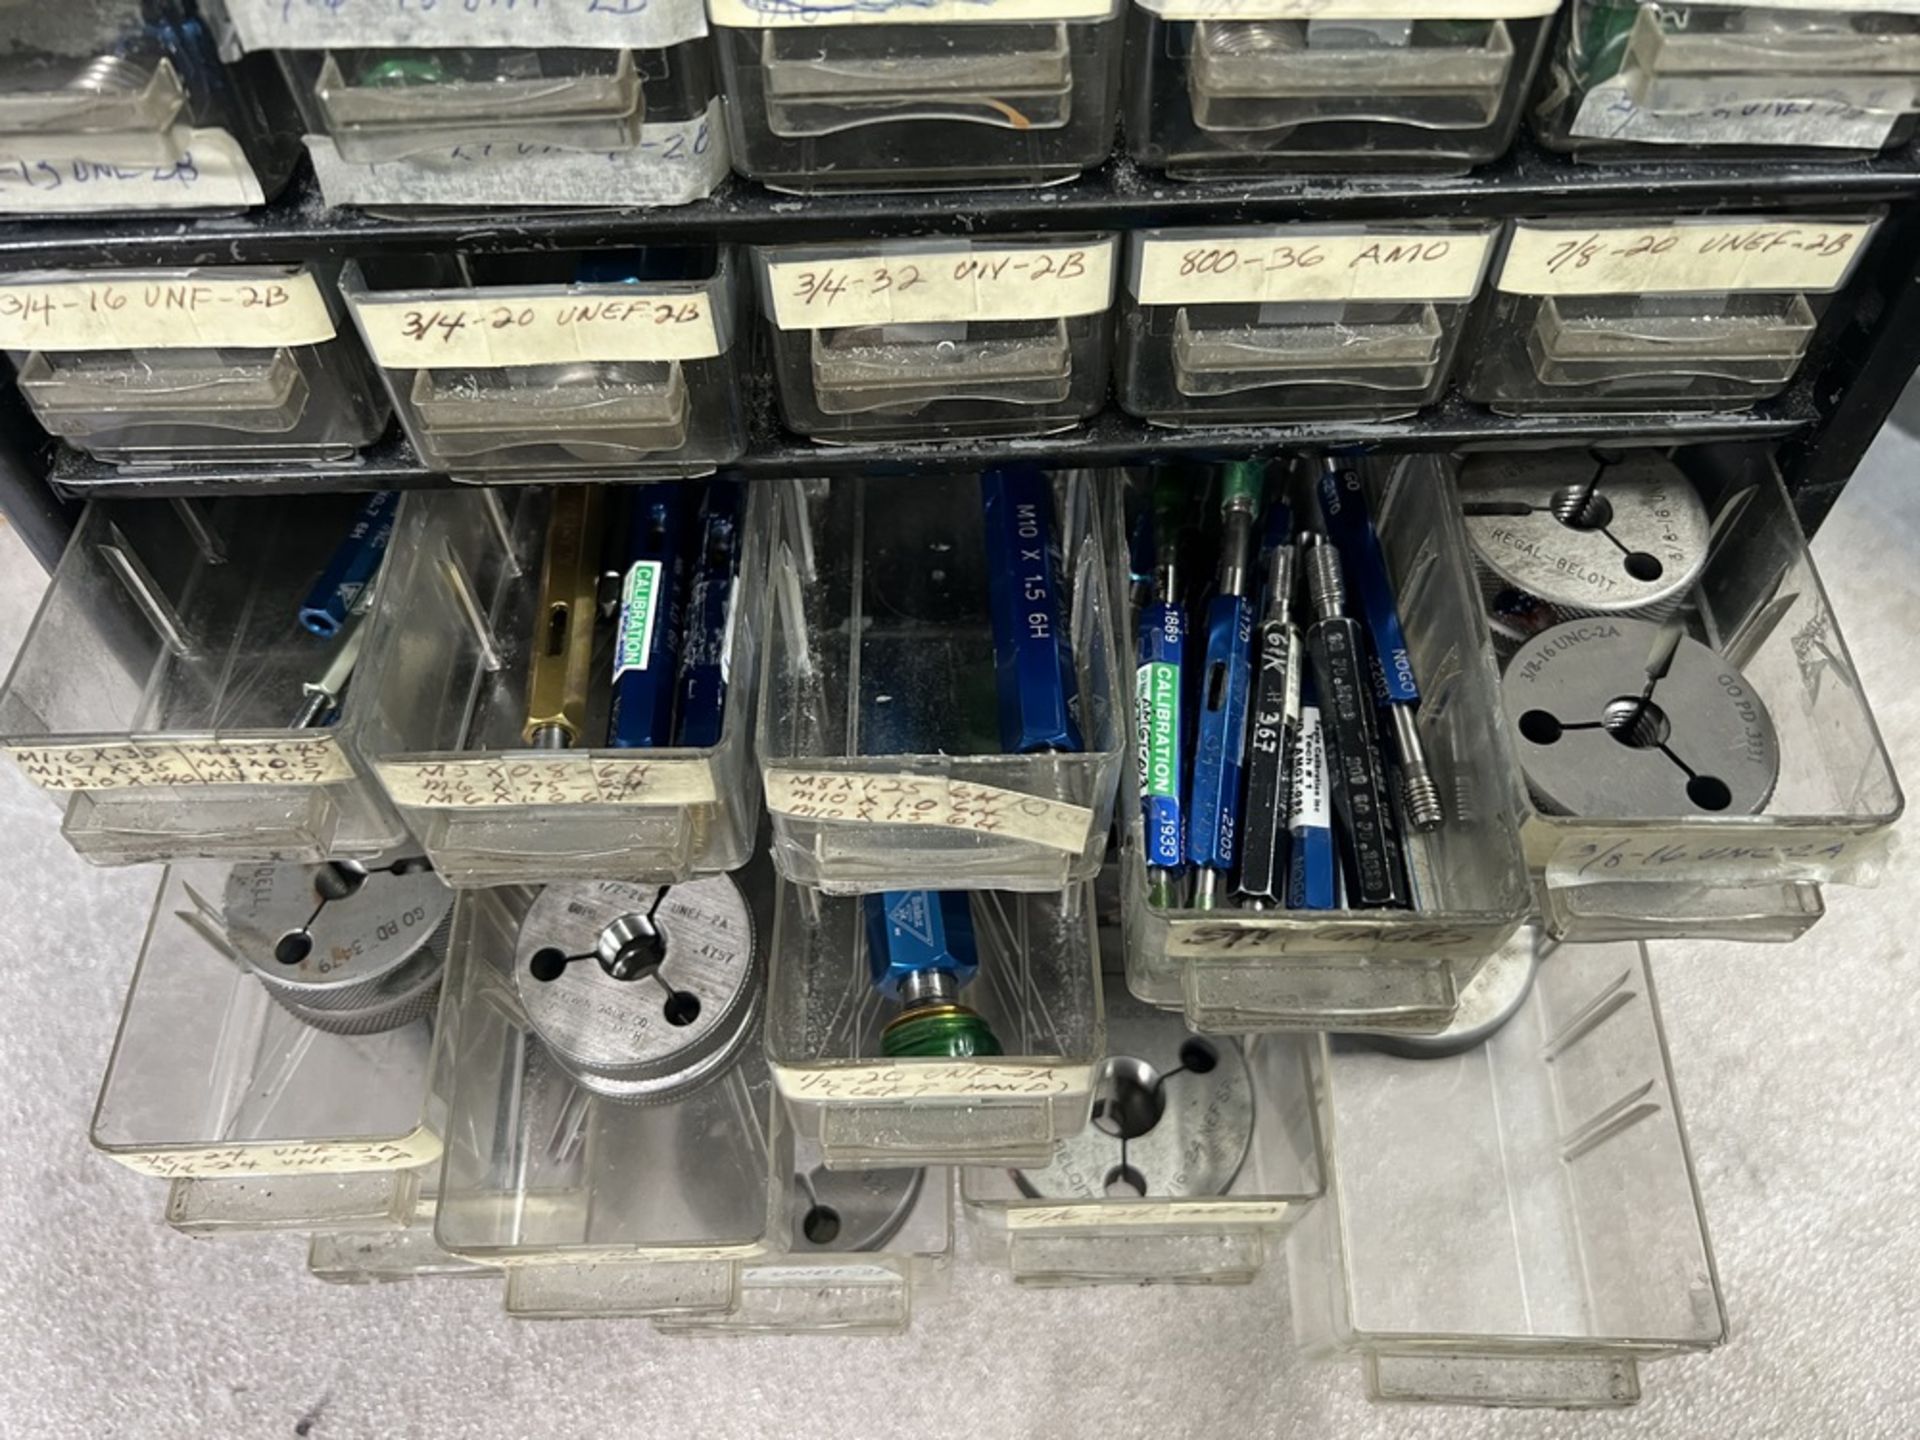 50 Station Organizer Full of Thread Gages Labeled Various Sizes - Image 13 of 13